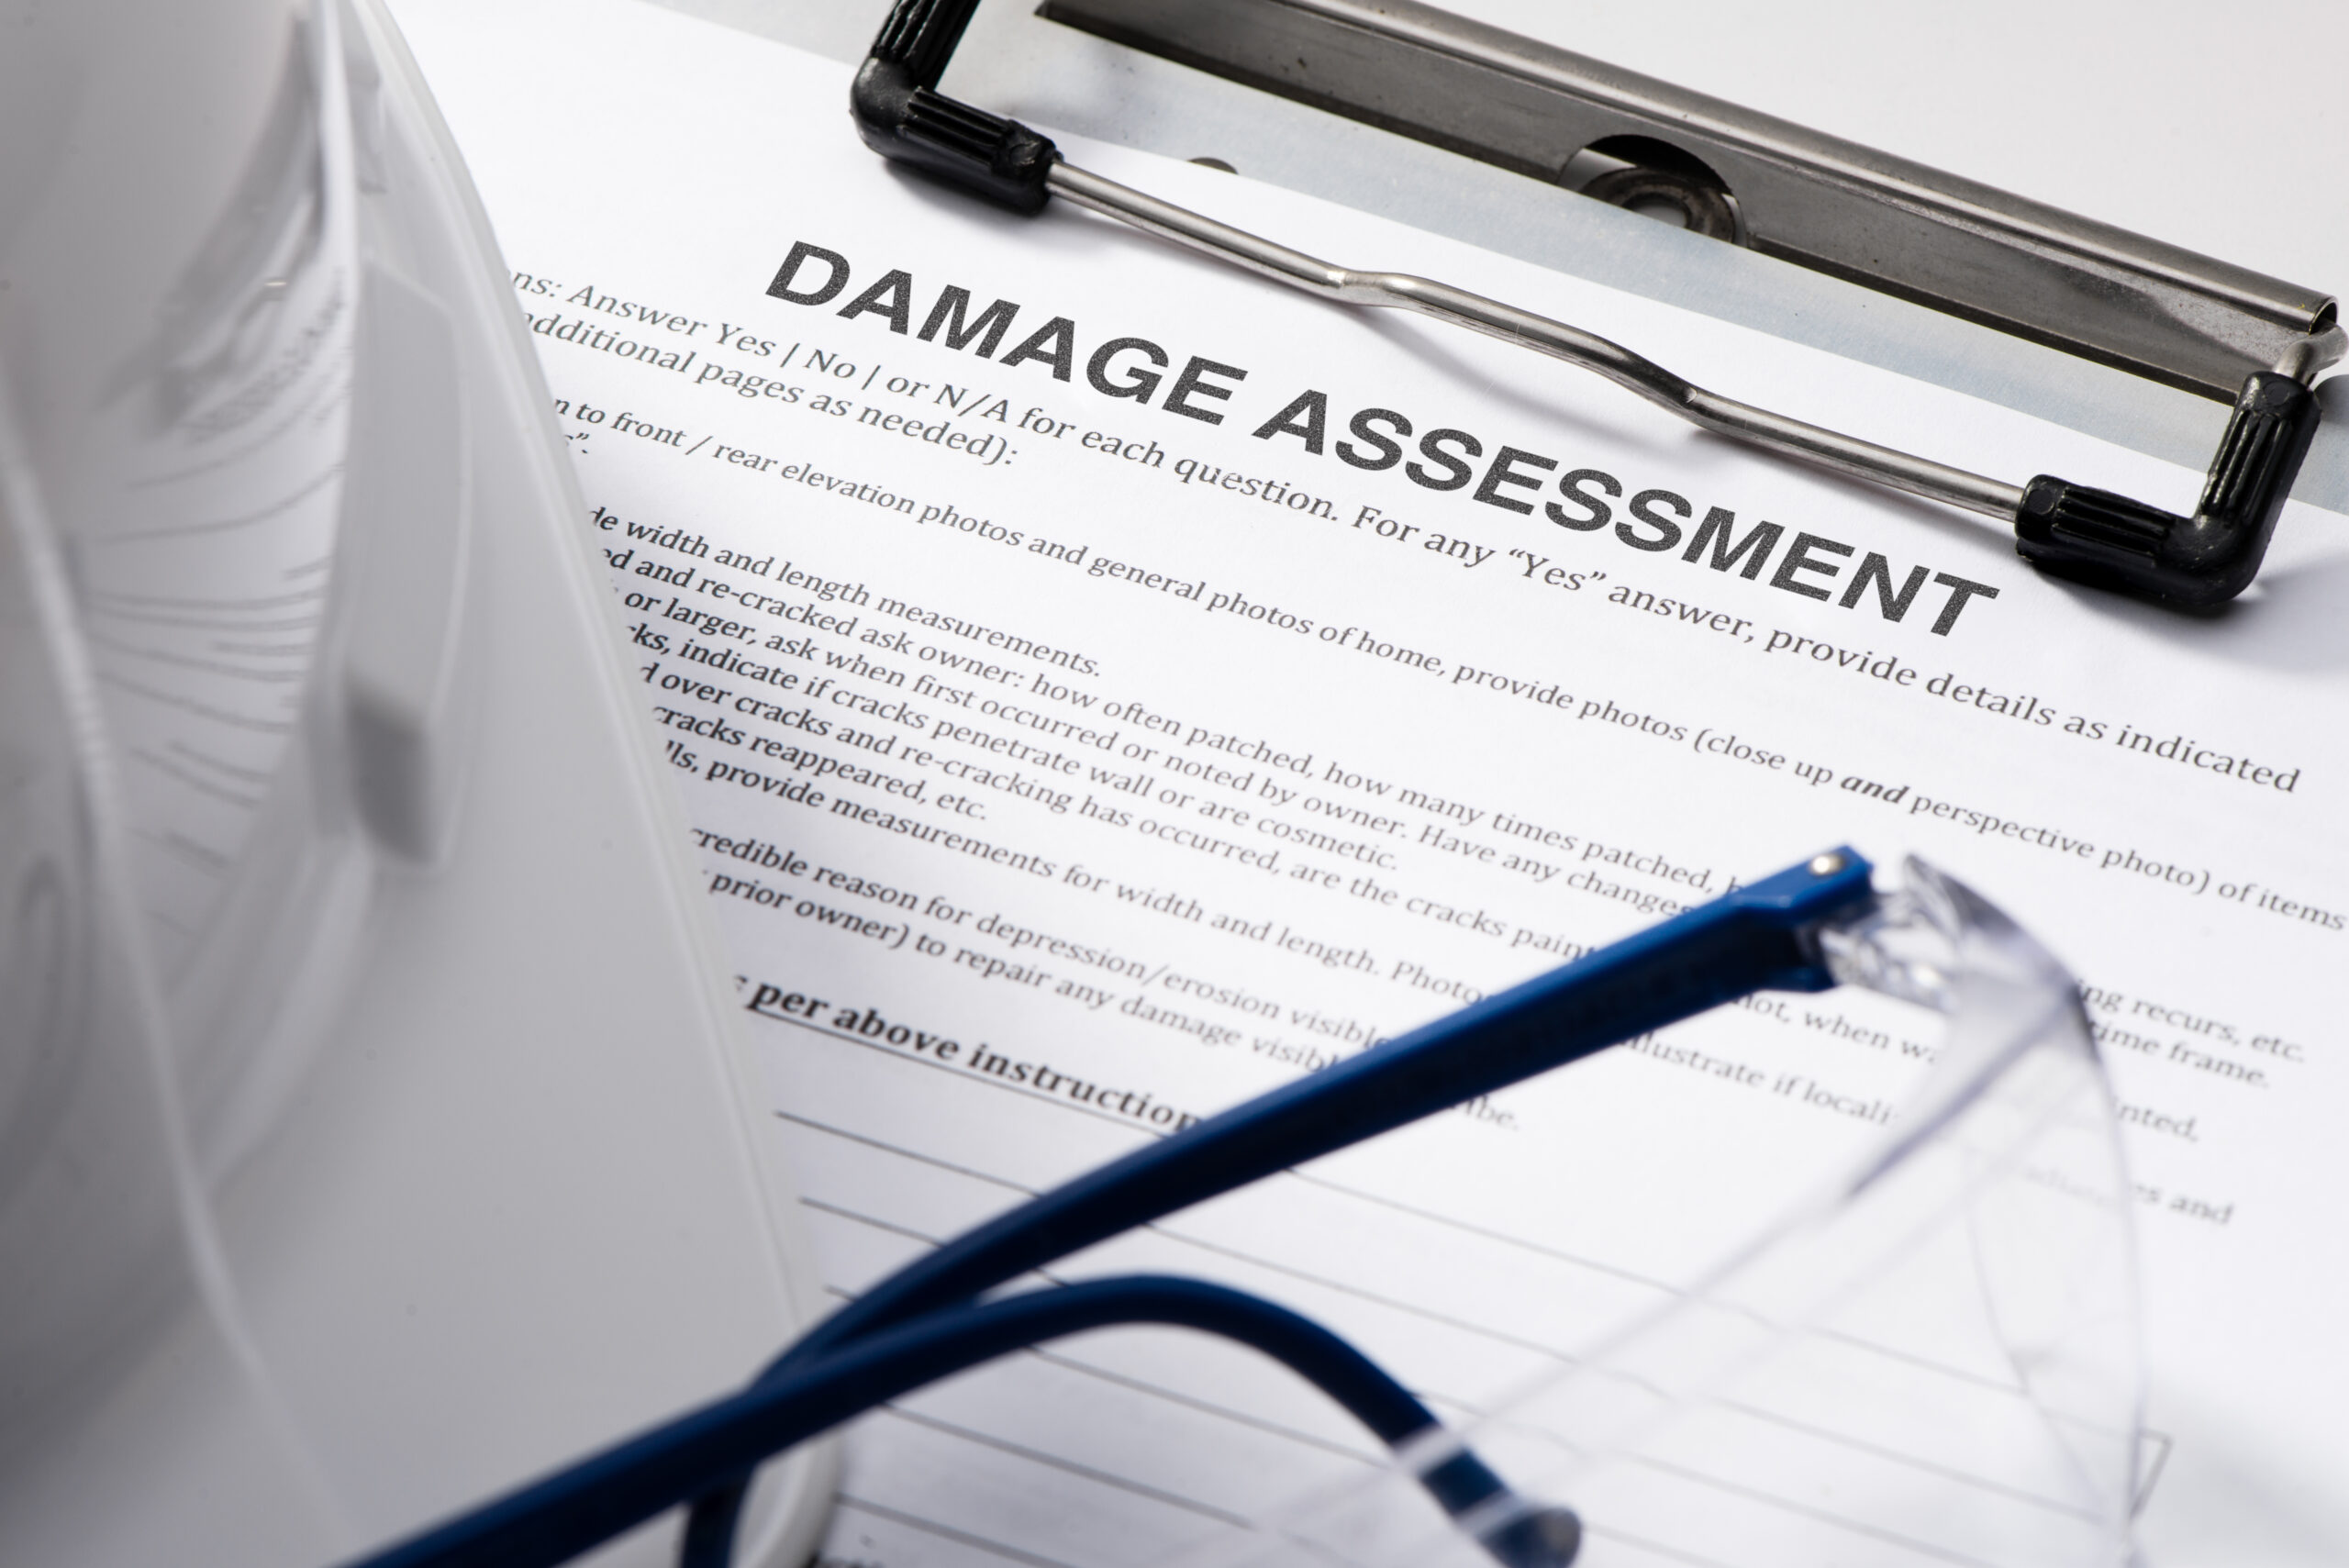 It is essential to cooperate in the insurance claim process to ensure a proper settlement.